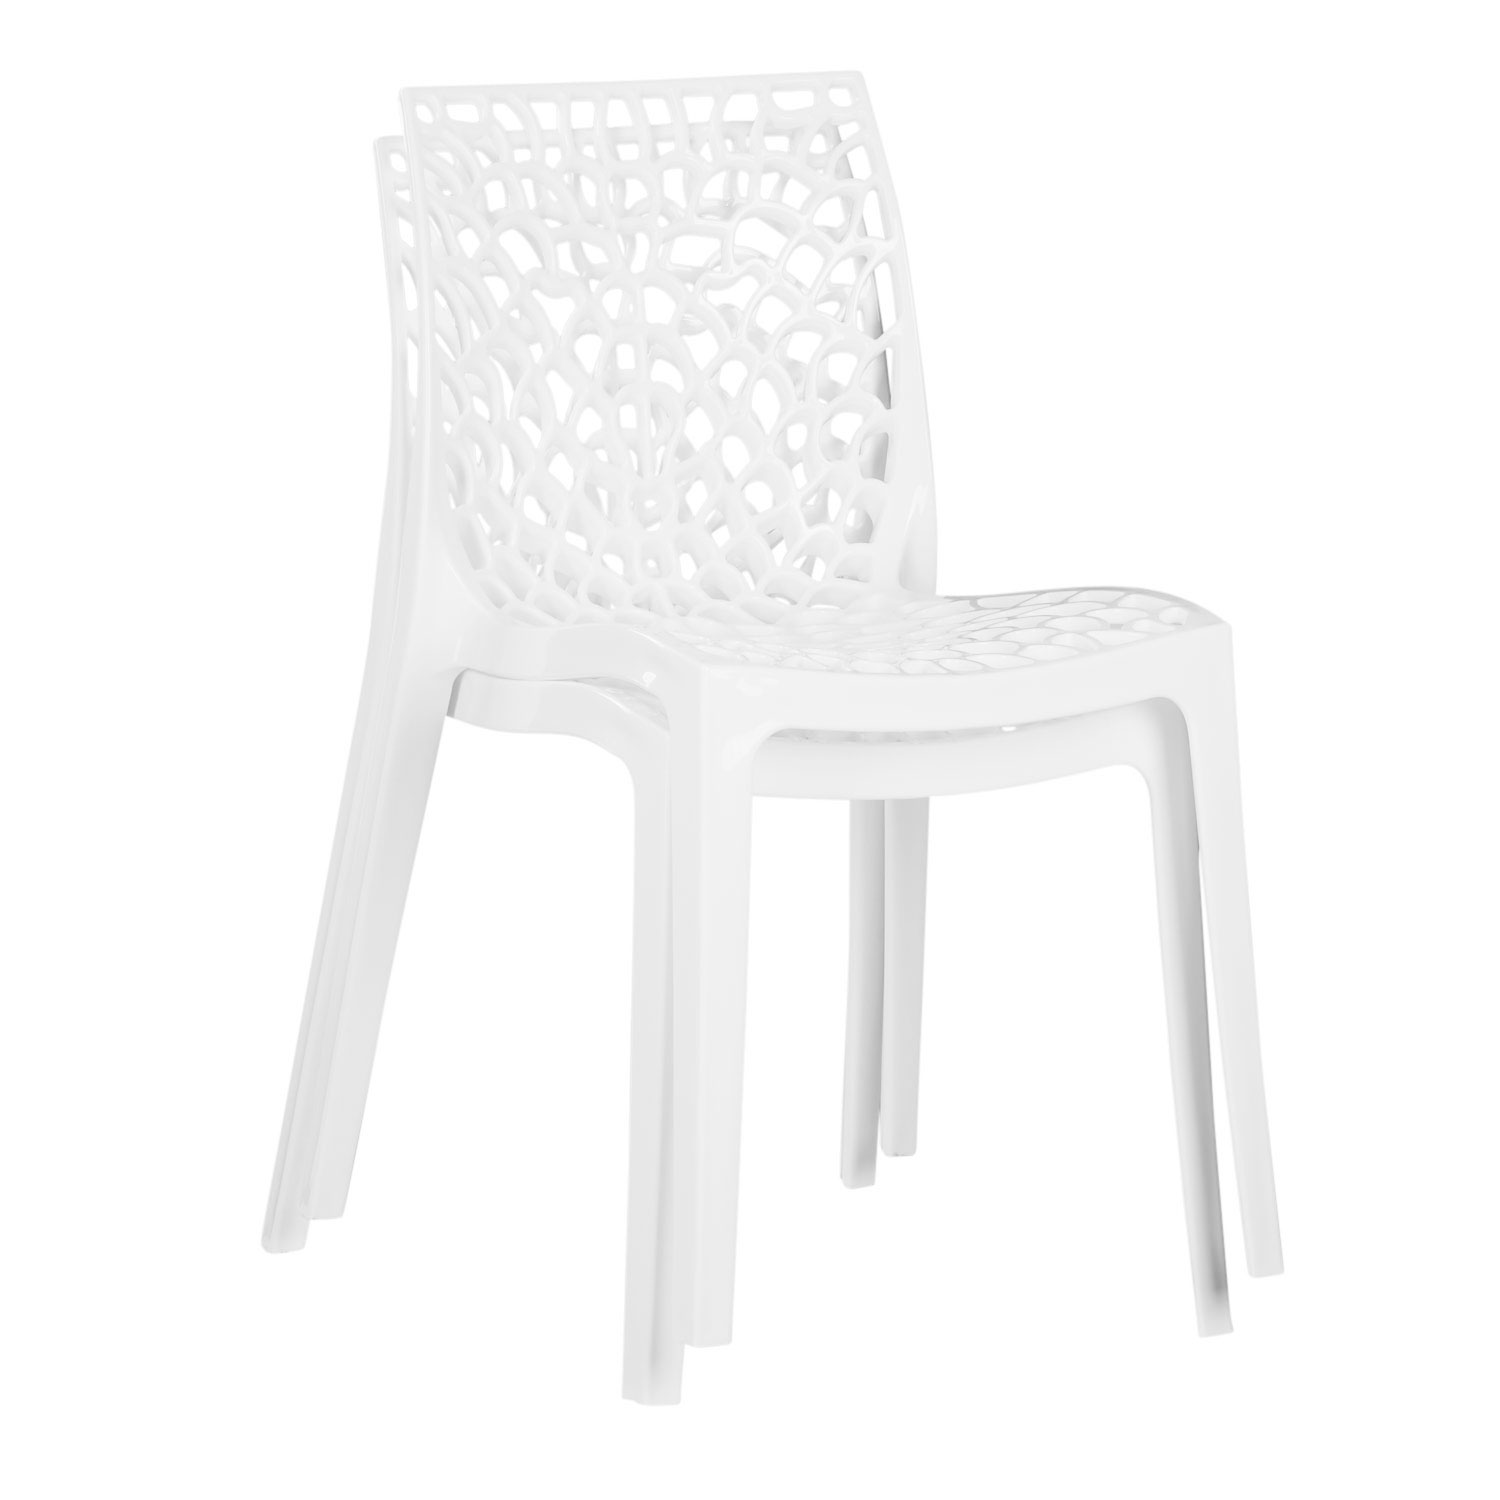 Design Garden chair Set of 2, 4, 6 White Modern Camping chairs Outdoor chairs Plastic Stacking chairs